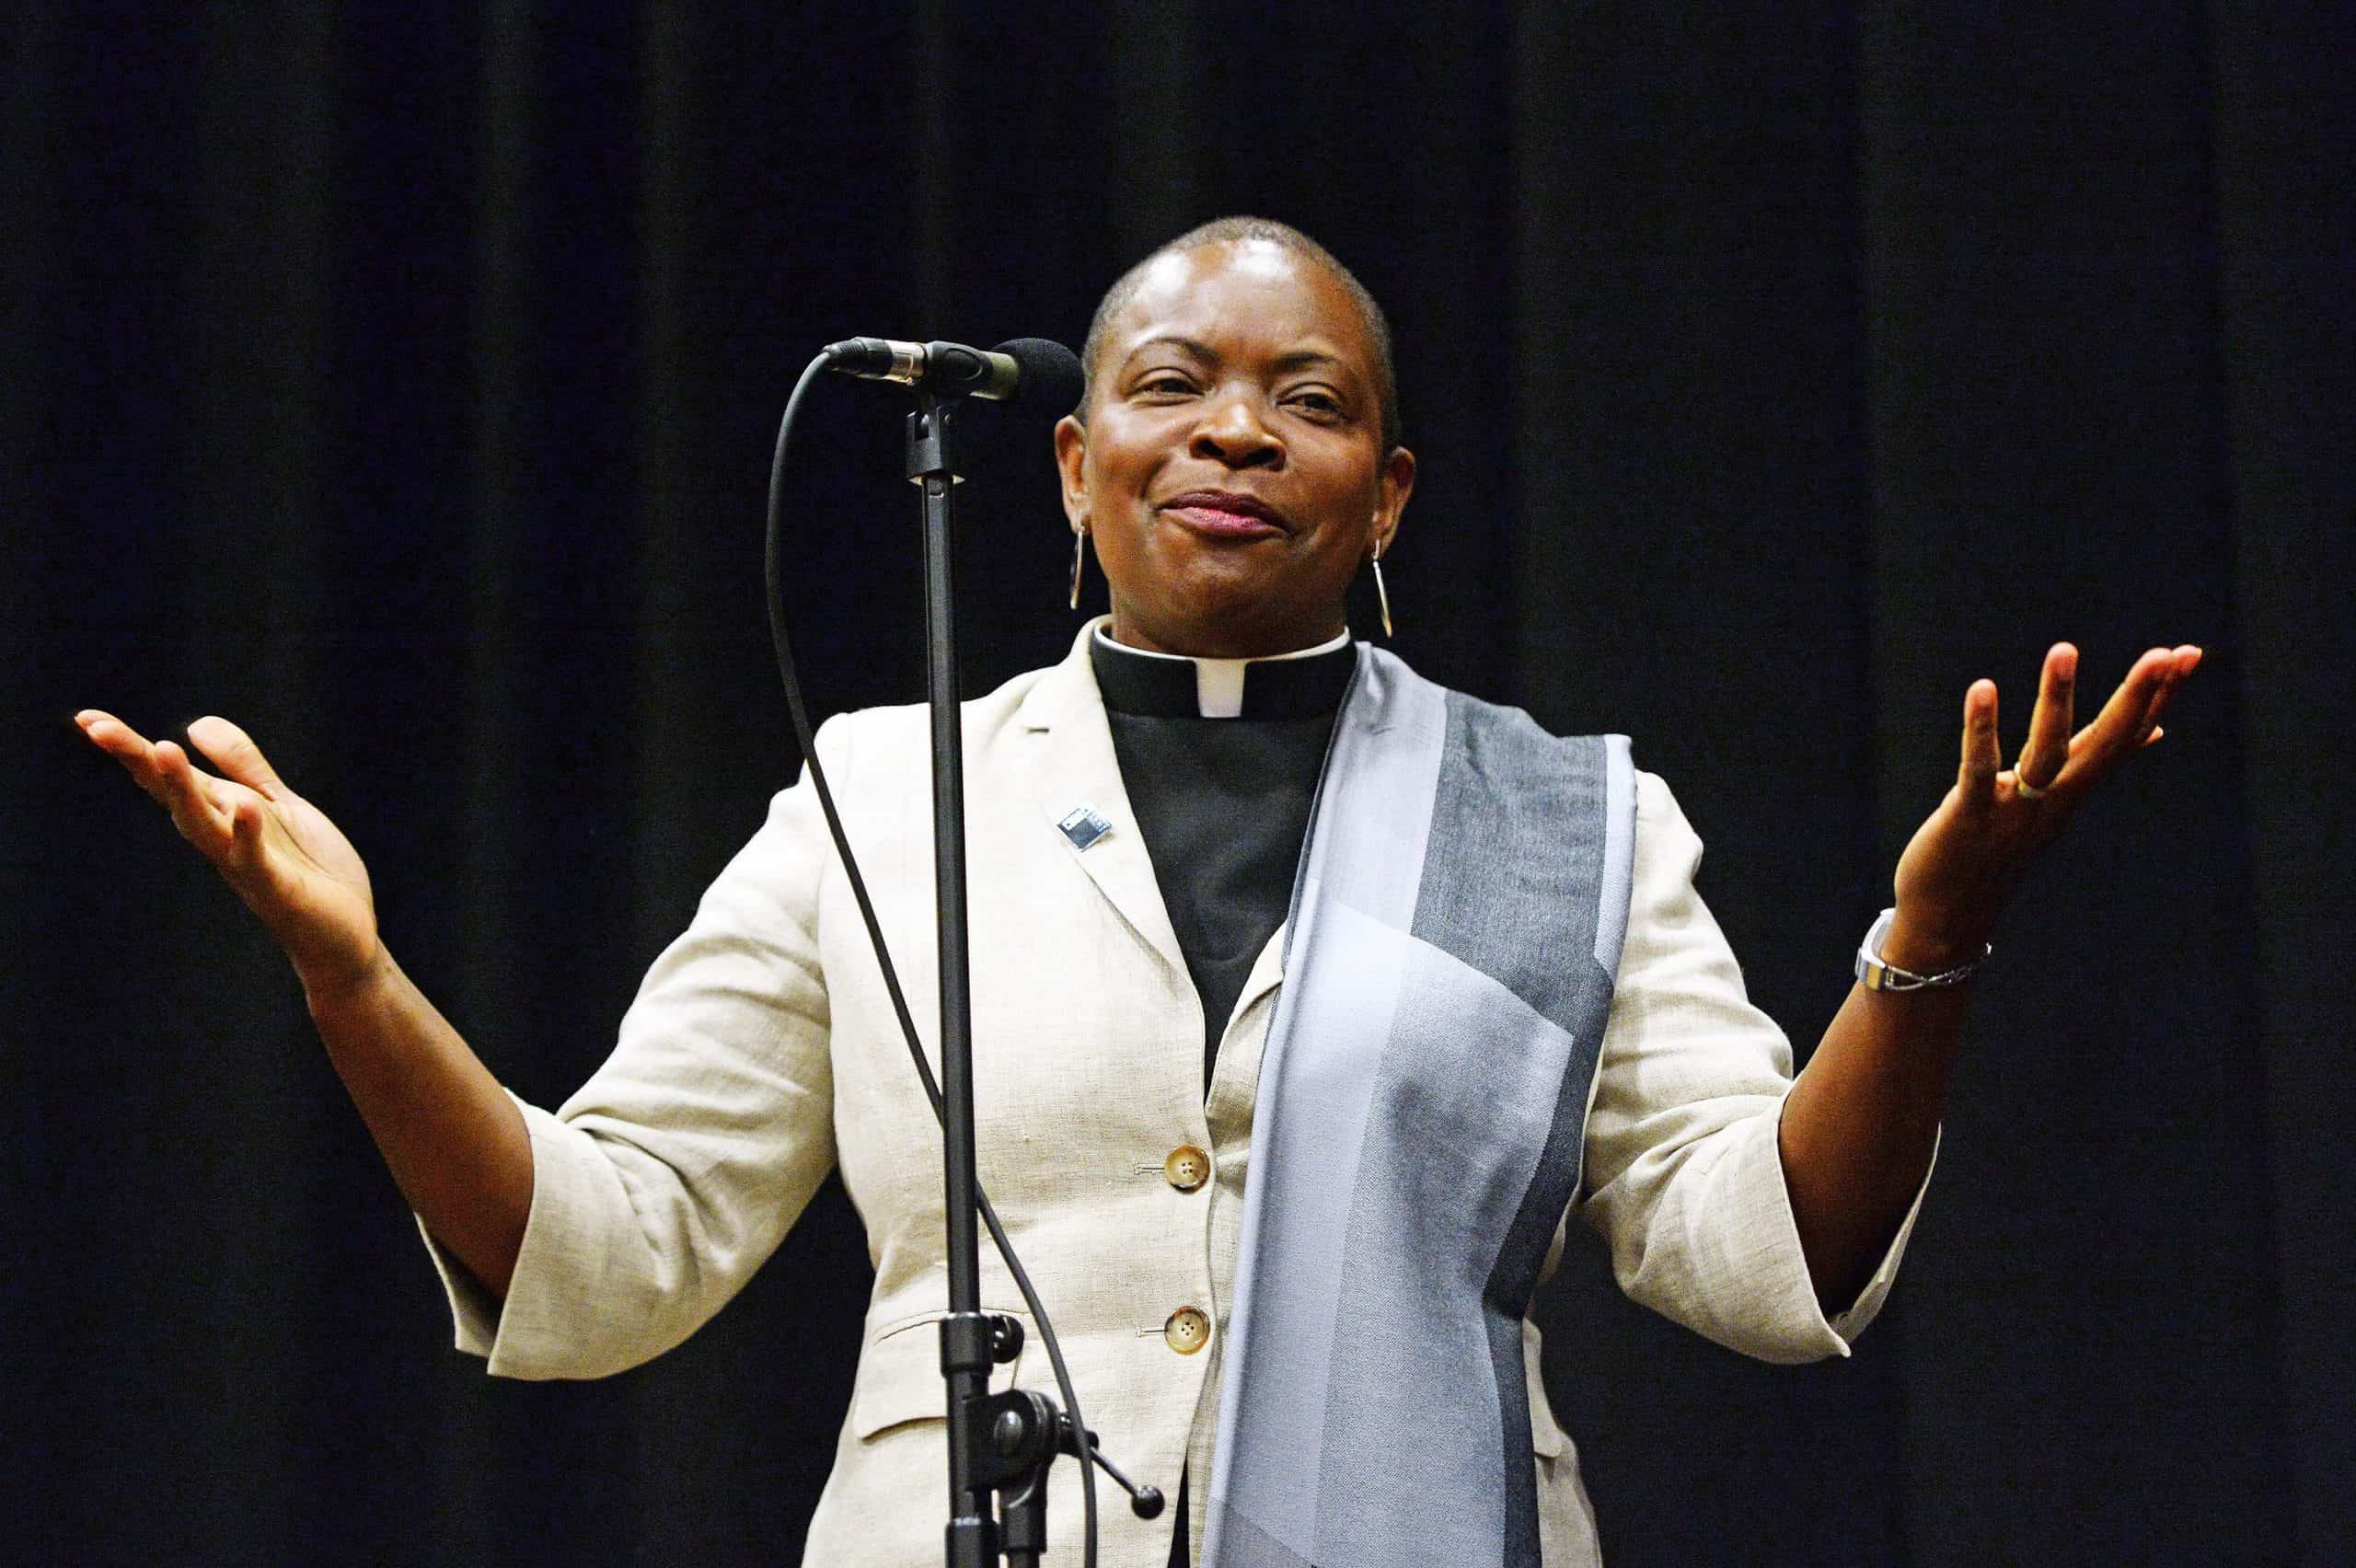 Britain not yet a model for racial equality, Church of England’s first black female bishop has said